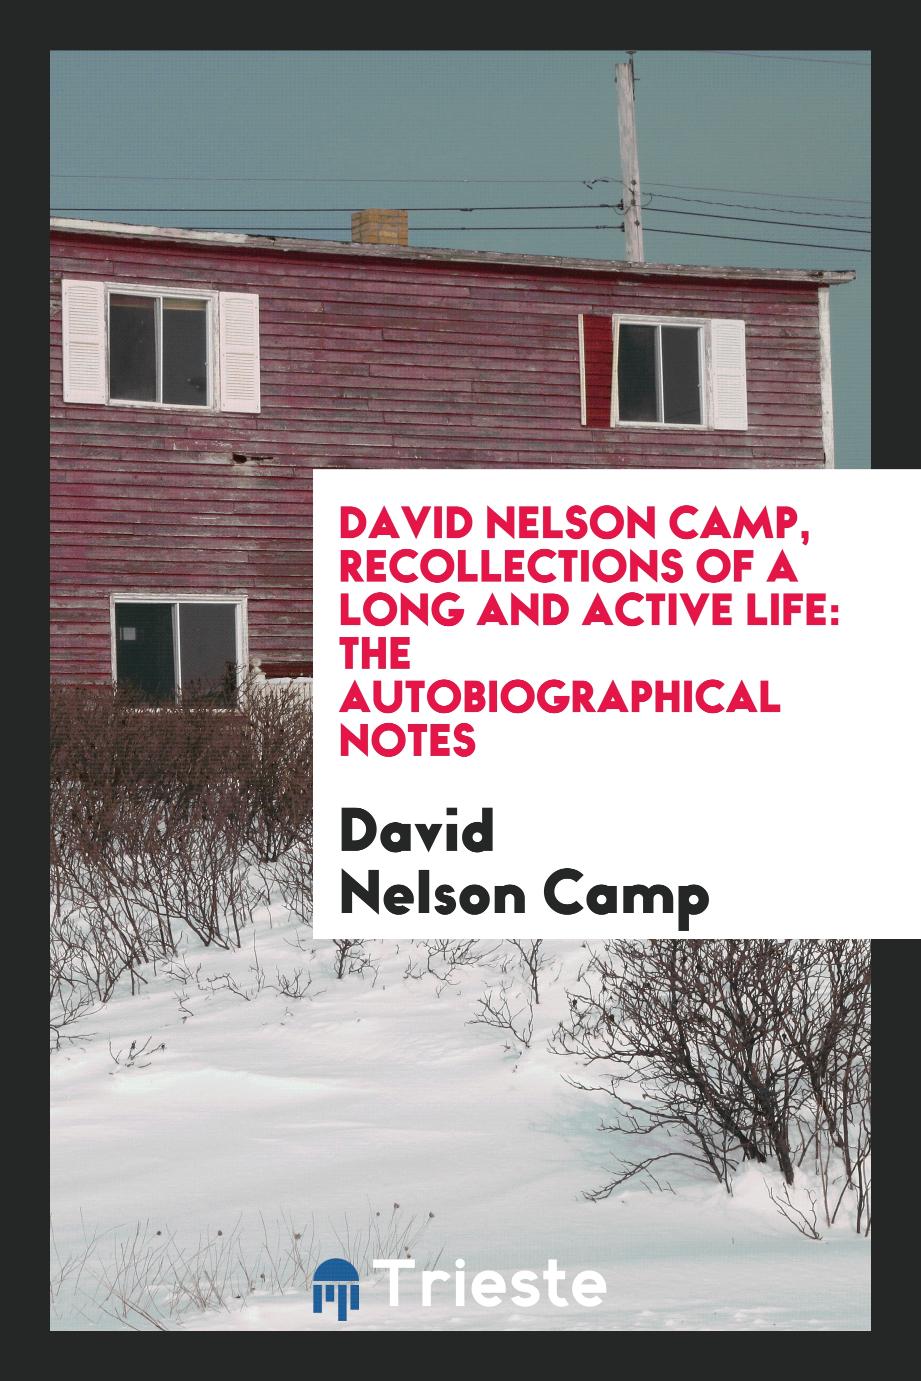 David Nelson Camp, Recollections of a Long and Active Life: The Autobiographical Notes